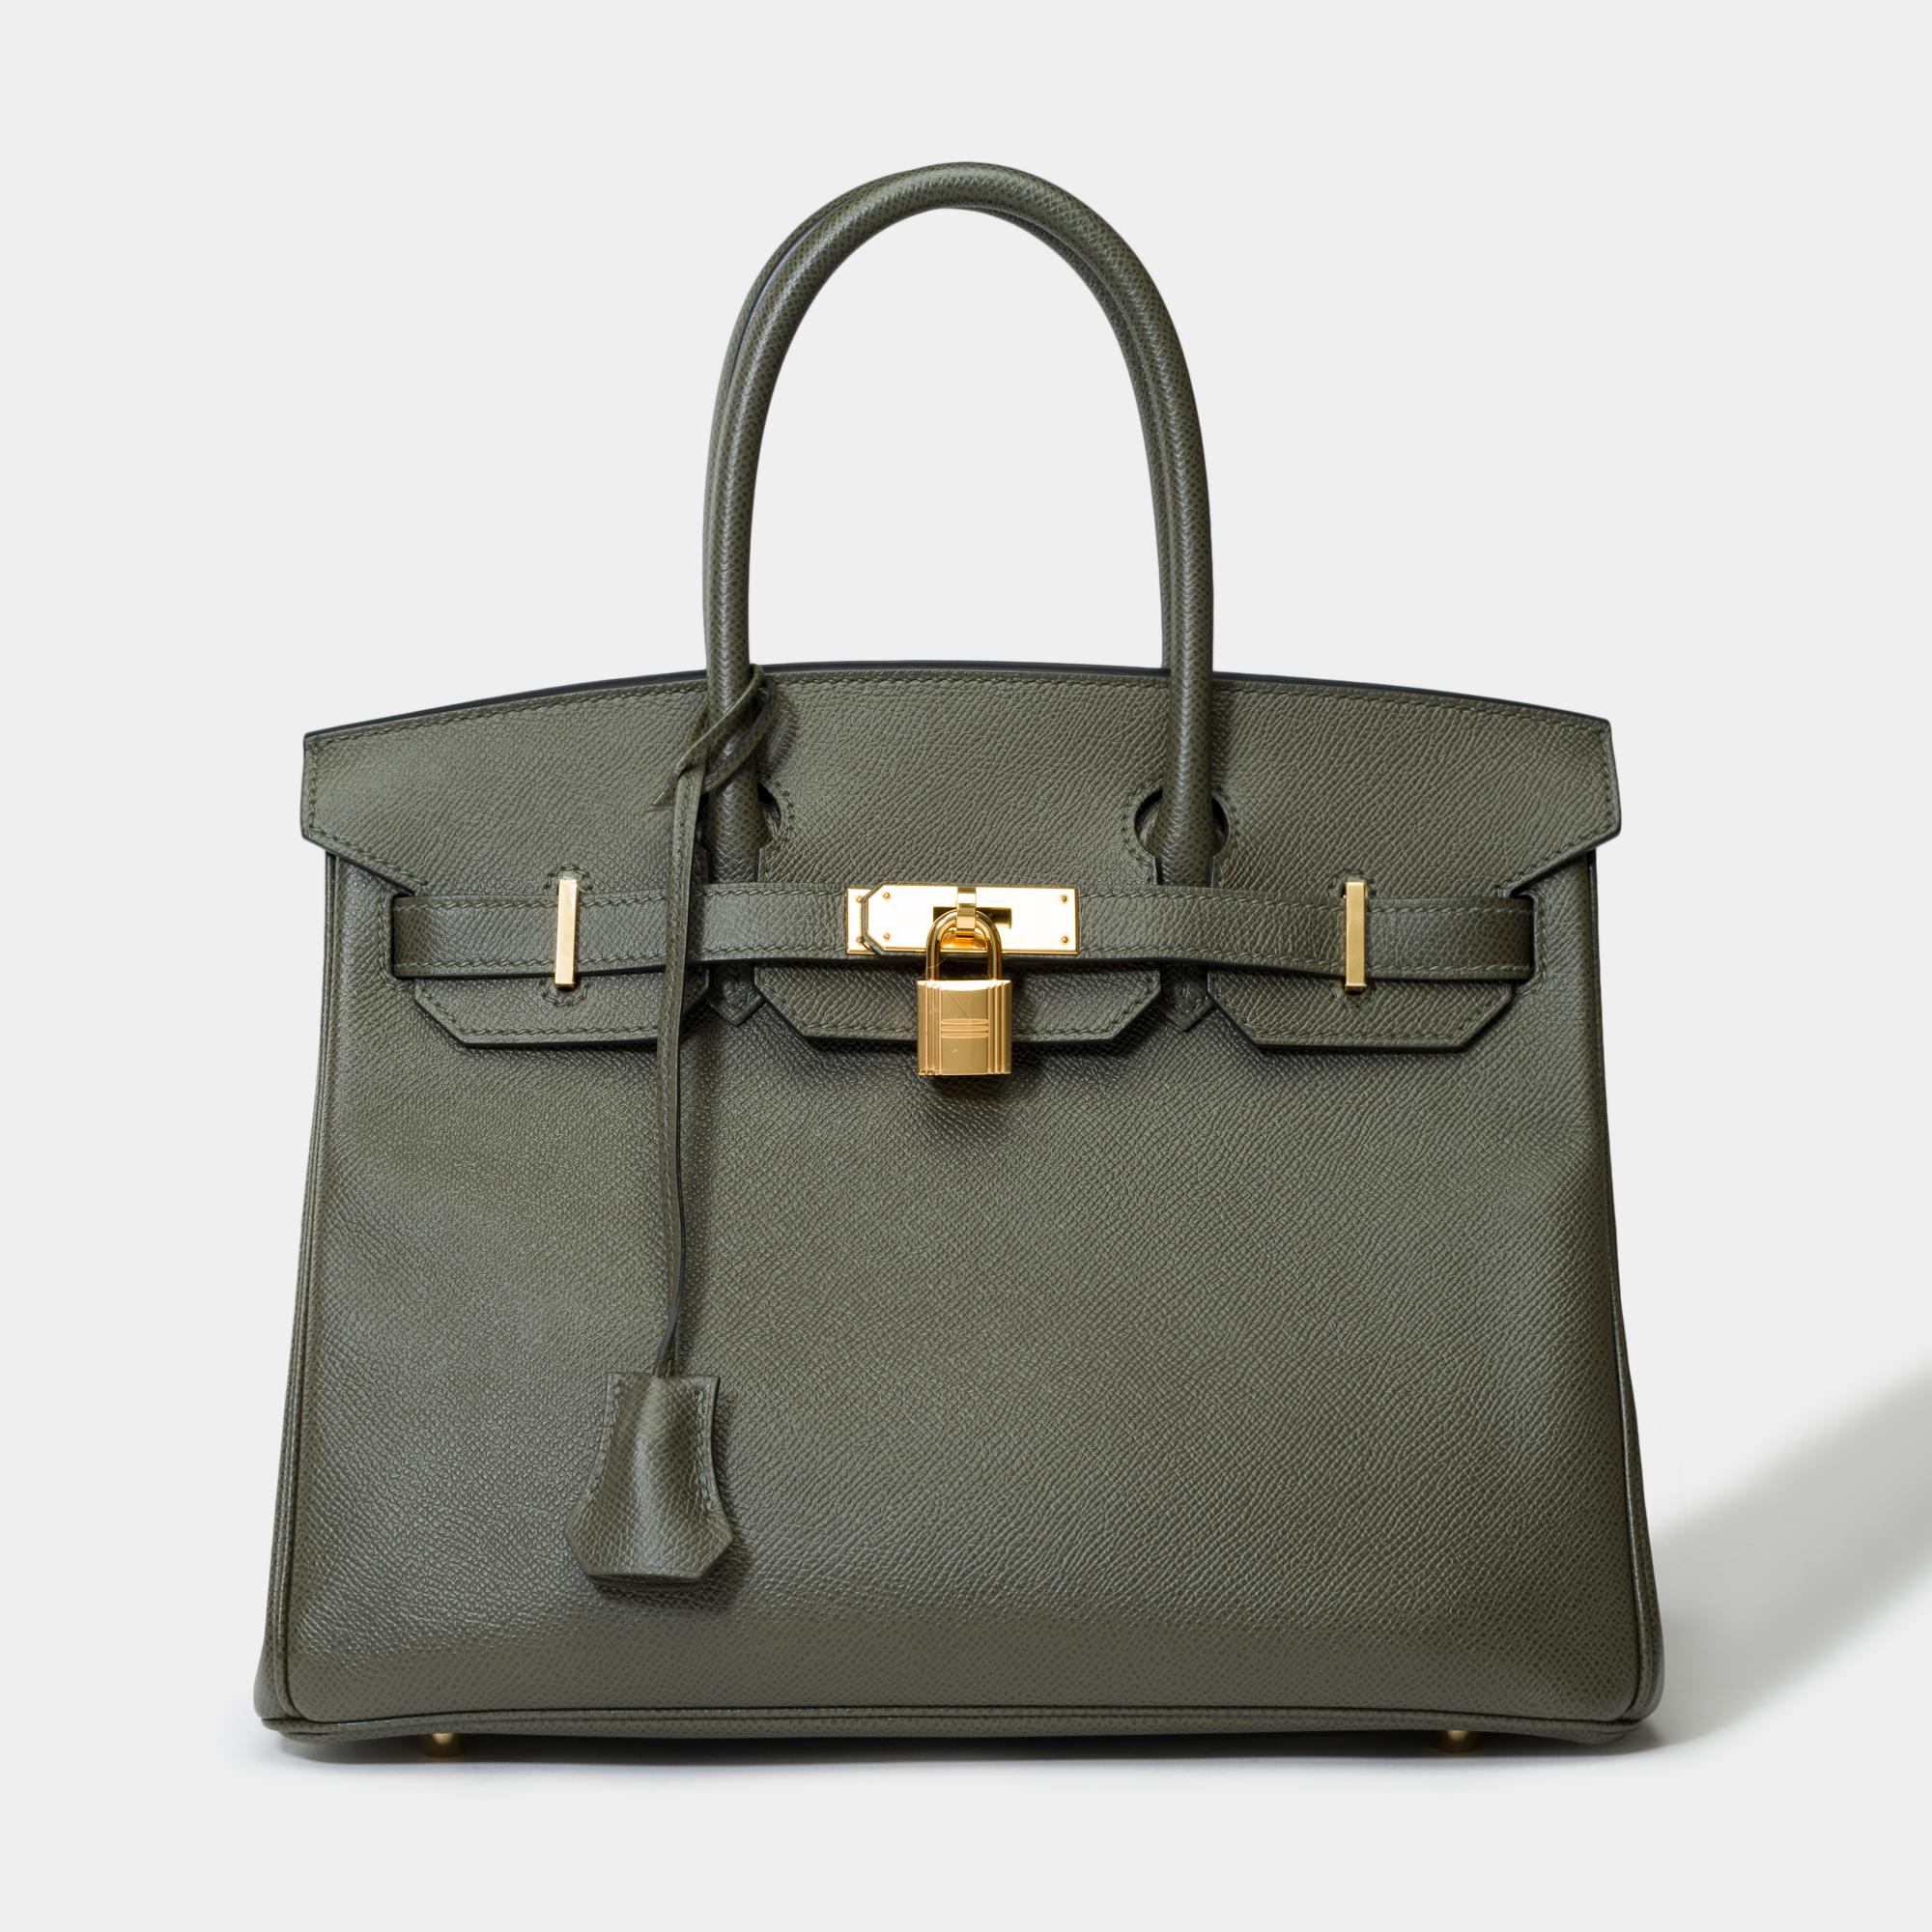 Splendid​ ​Hermes​ ​Birkin​ ​30​ ​handbag​ ​in​ ​Vert​ ​de​ ​Gris​ ​Epsom​ ​leather,​ ​gold​ ​plated​ ​metal​ ​trim​ ​,​ ​double​ ​handle​ ​in​ ​green​ ​leather​ ​allowing​ ​a​ ​hand​ ​carry

Flap​ ​closure
Green​ ​leather​ ​inner​ ​lining​ ​,​ ​a​